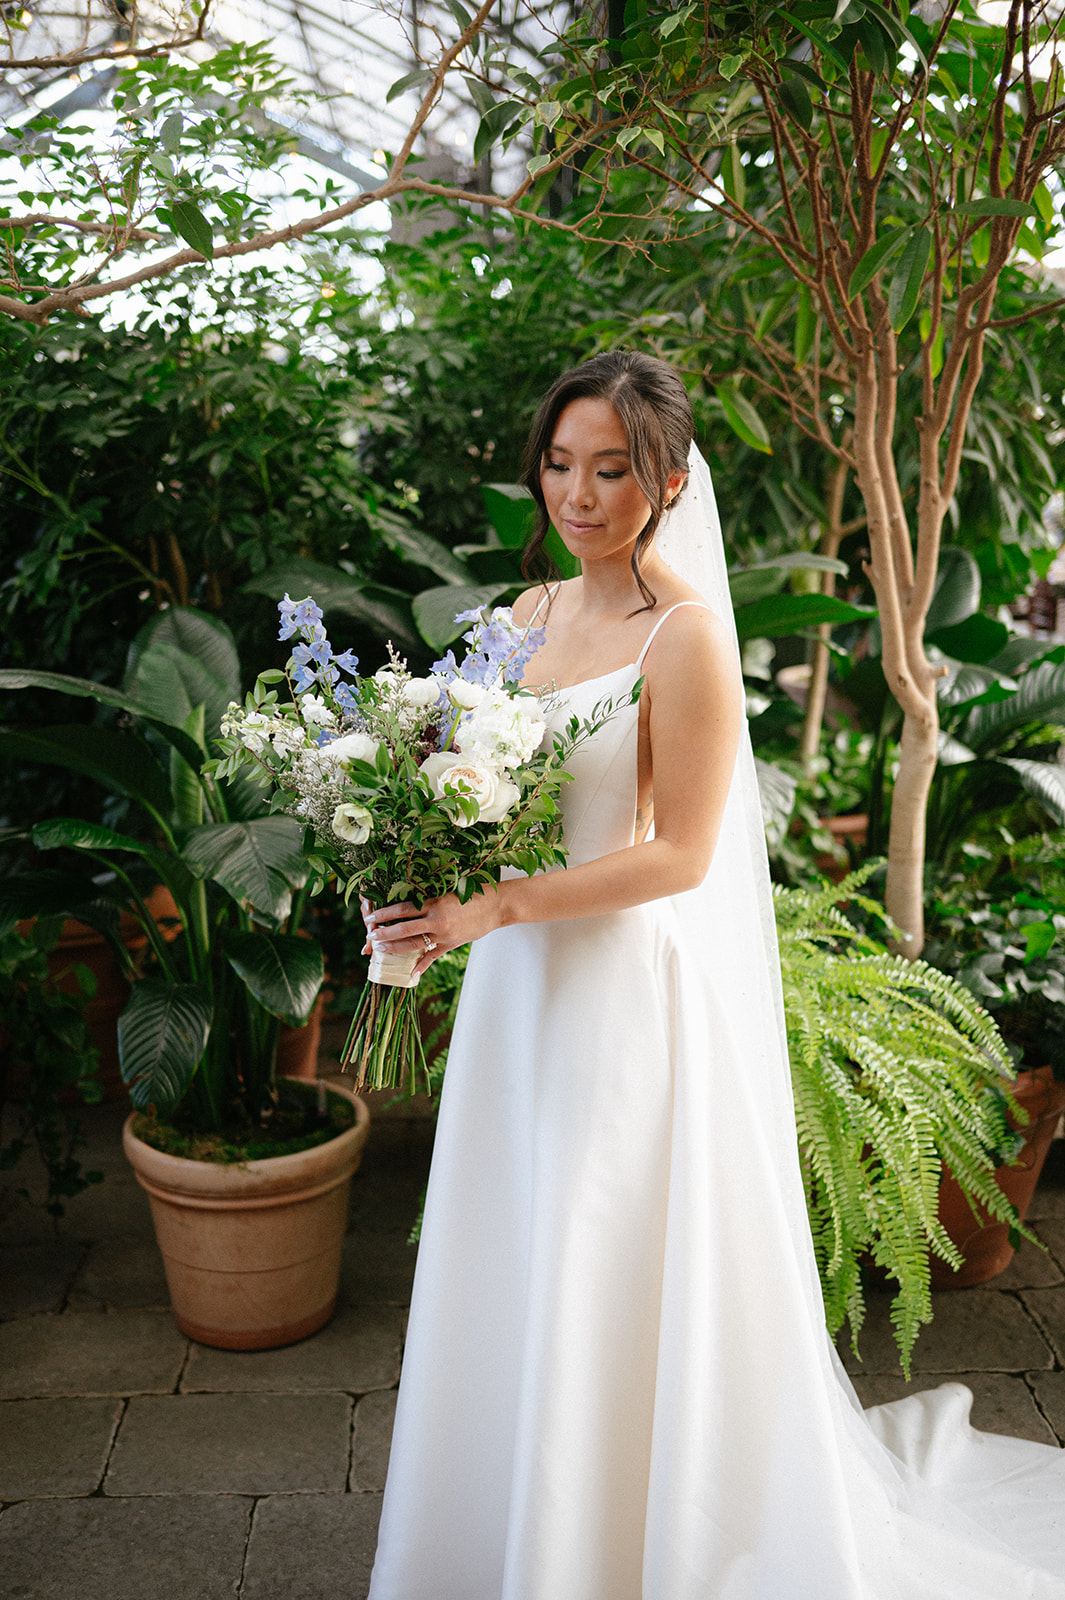 The bride posing in front of the foliage in the greenhouse at Planterra Conservatory in Michigan.